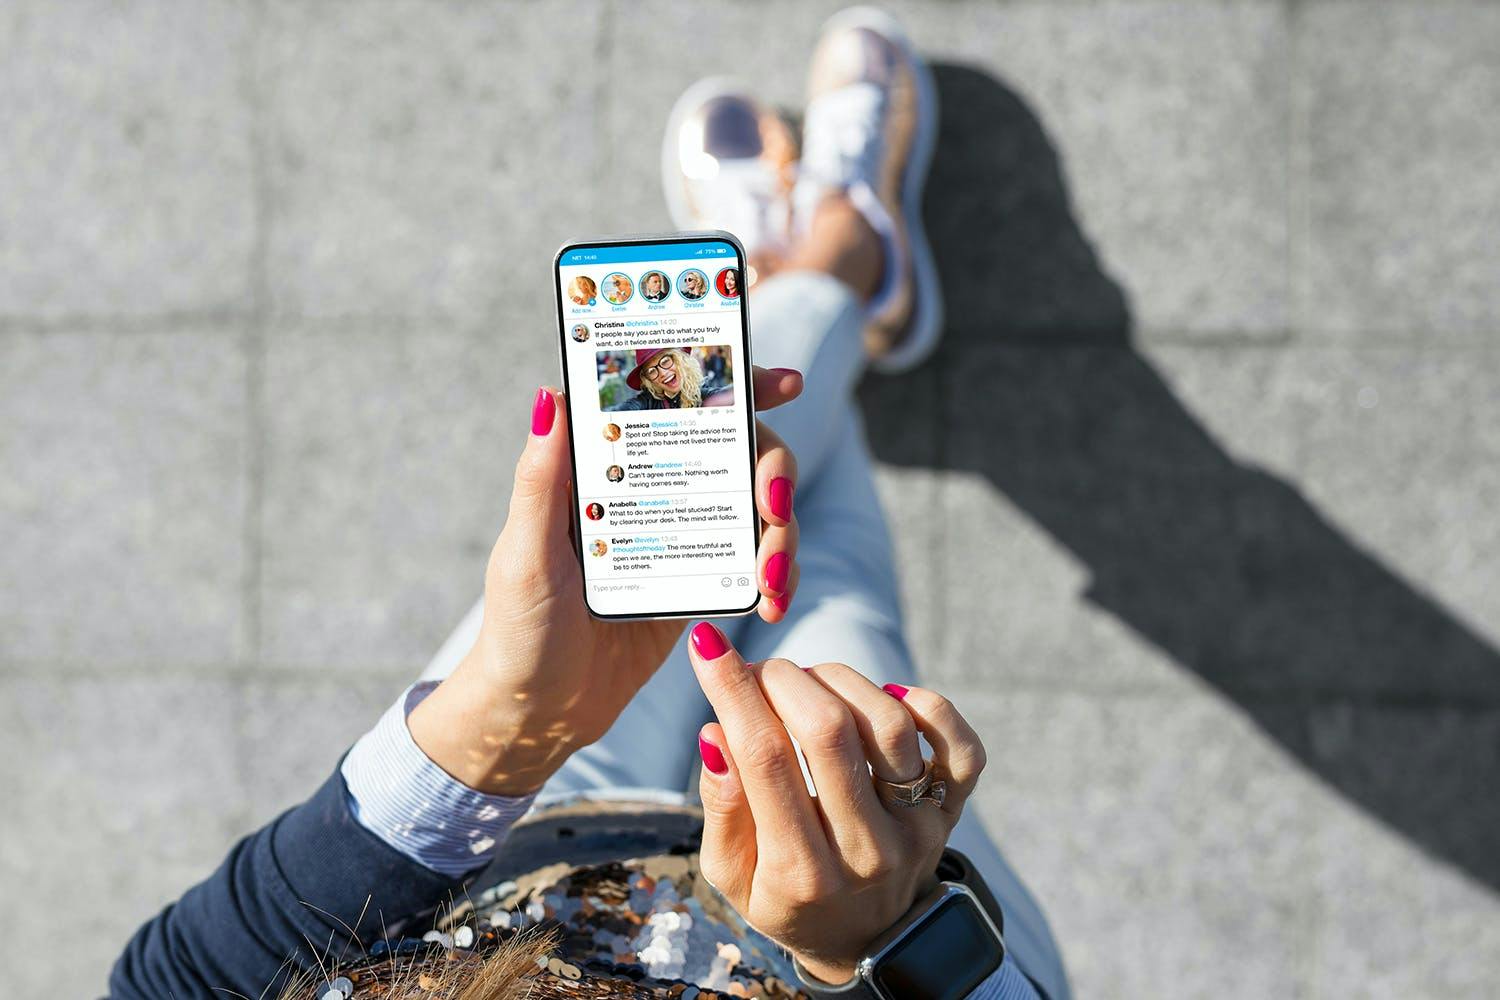 Image of a person walking down the street with a smartphone with an open Twitter screen in her hand and feet.